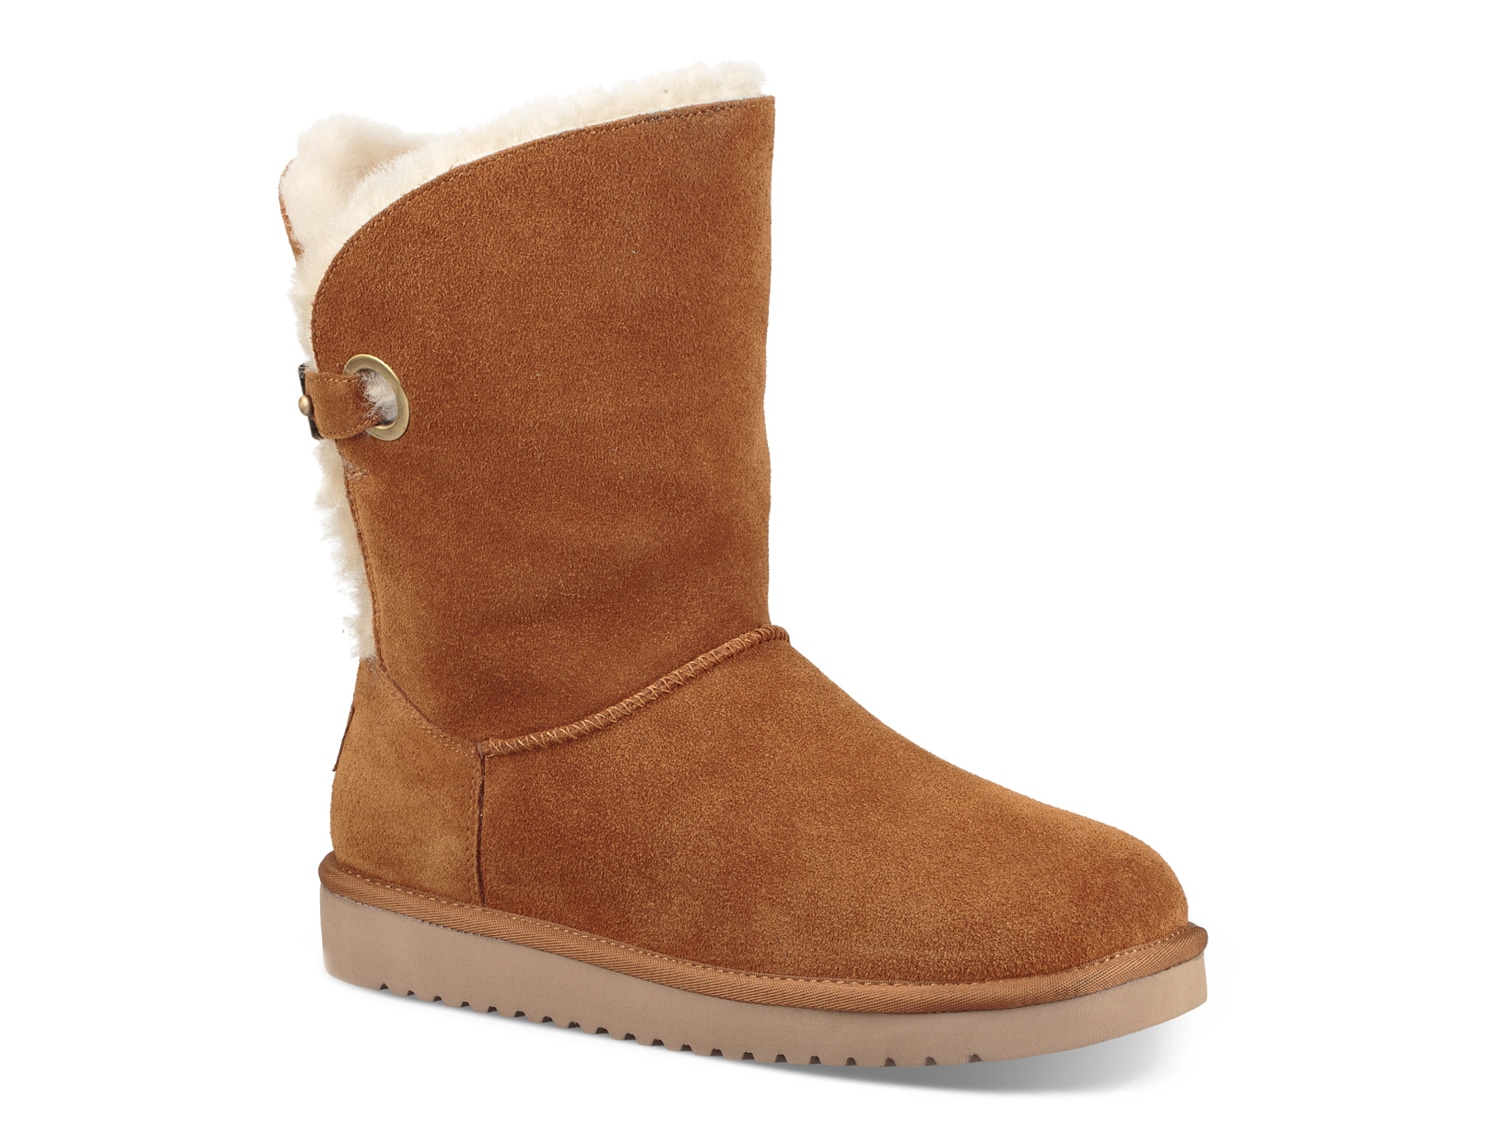 ugg boots dsw Cheaper Than Retail Price 